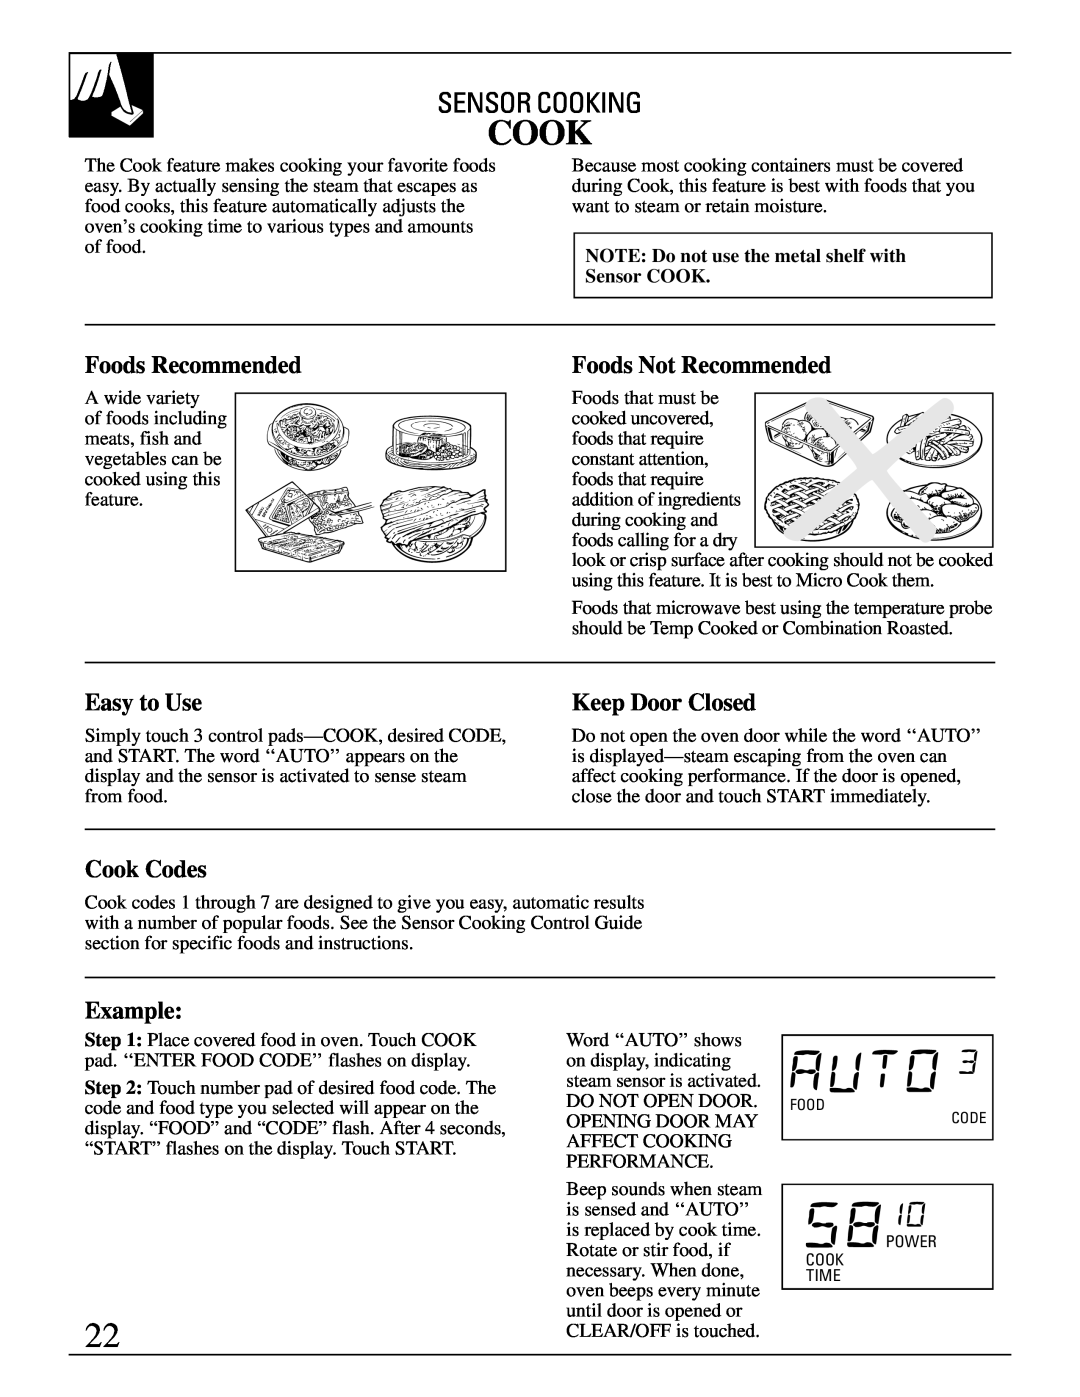 GE 49-8627 warranty Cook Codes, Sensor Cooking, Foods Recommended, Foods Not Recommended, Easy to Use, Keep Door Closed 